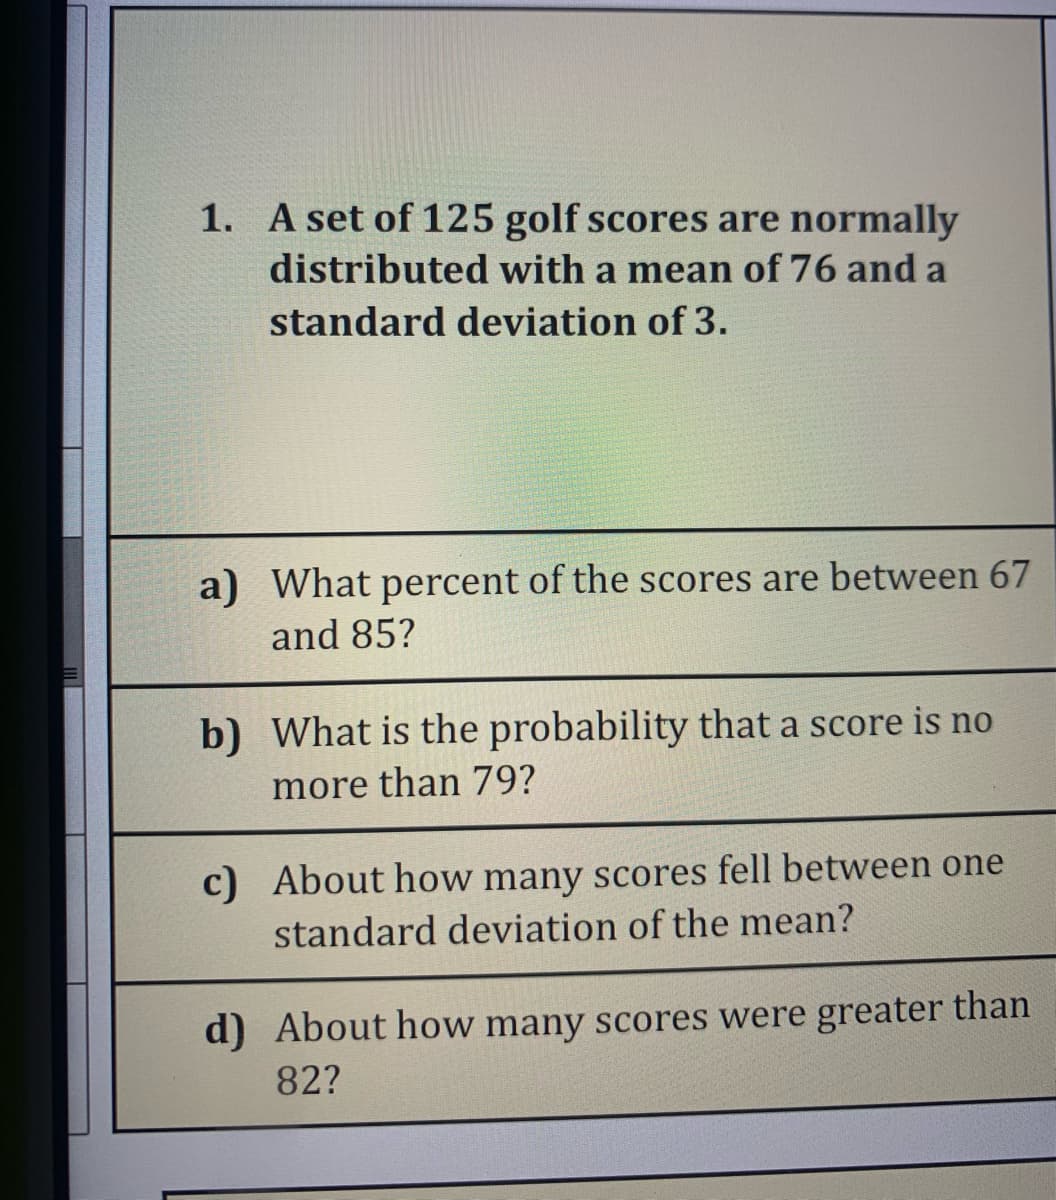 1. A set of 125 golf scores are normally
distributed with a mean of 76 and a
standard deviation of 3.
a) What percent of the scores are between 67
and 85?
b) What is the probability that a score is no
more than 79?
c) About how many scores fell between one
standard deviation of the mean?
d) About how many scores were greater than
82?
